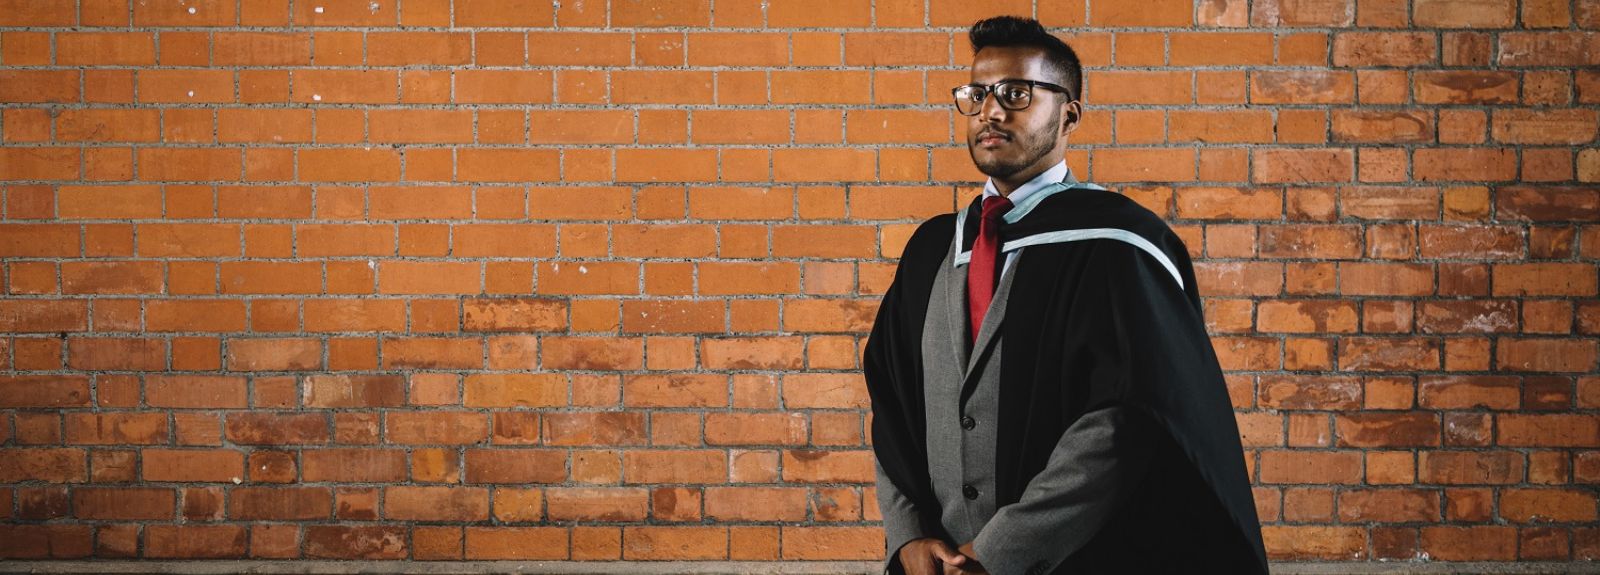 male student standing in a room getting a graduation photo taken in graduation gown